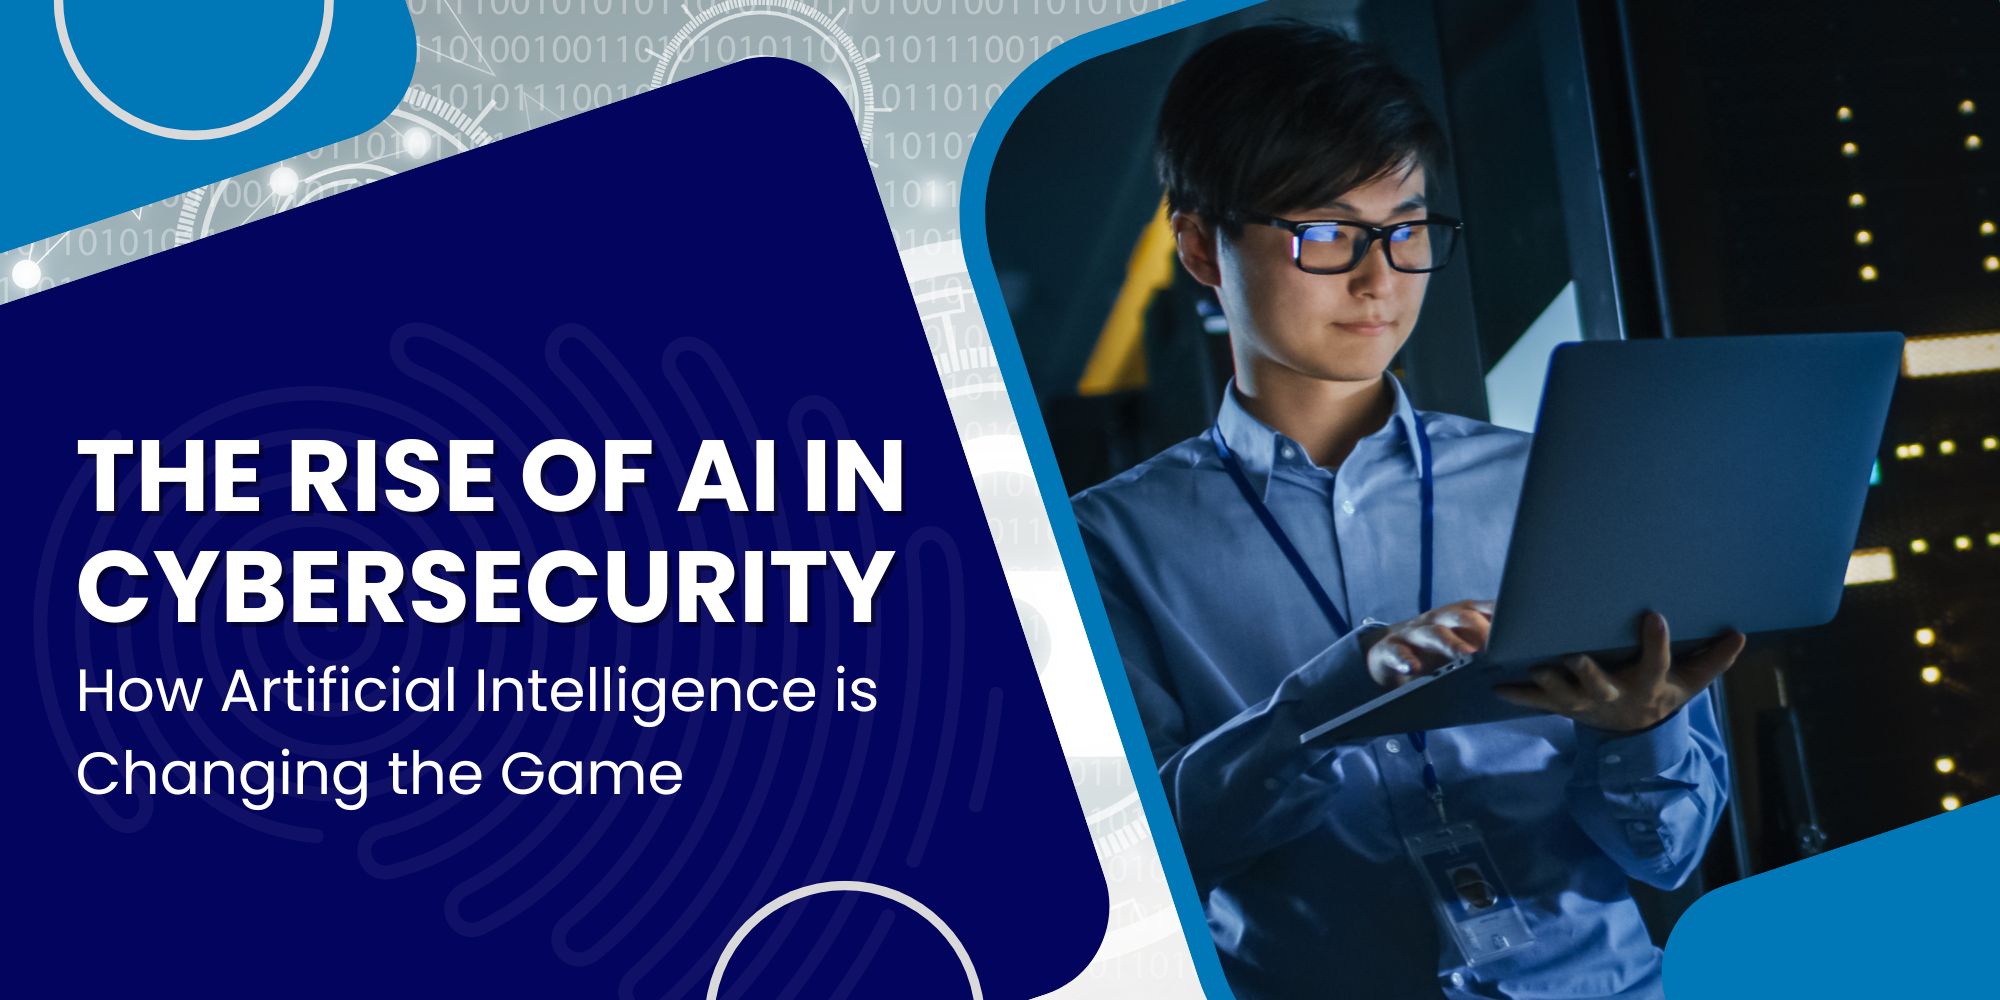 The Rise of AI in Cybersecurity: How Artificial Intelligence is Changing the Game